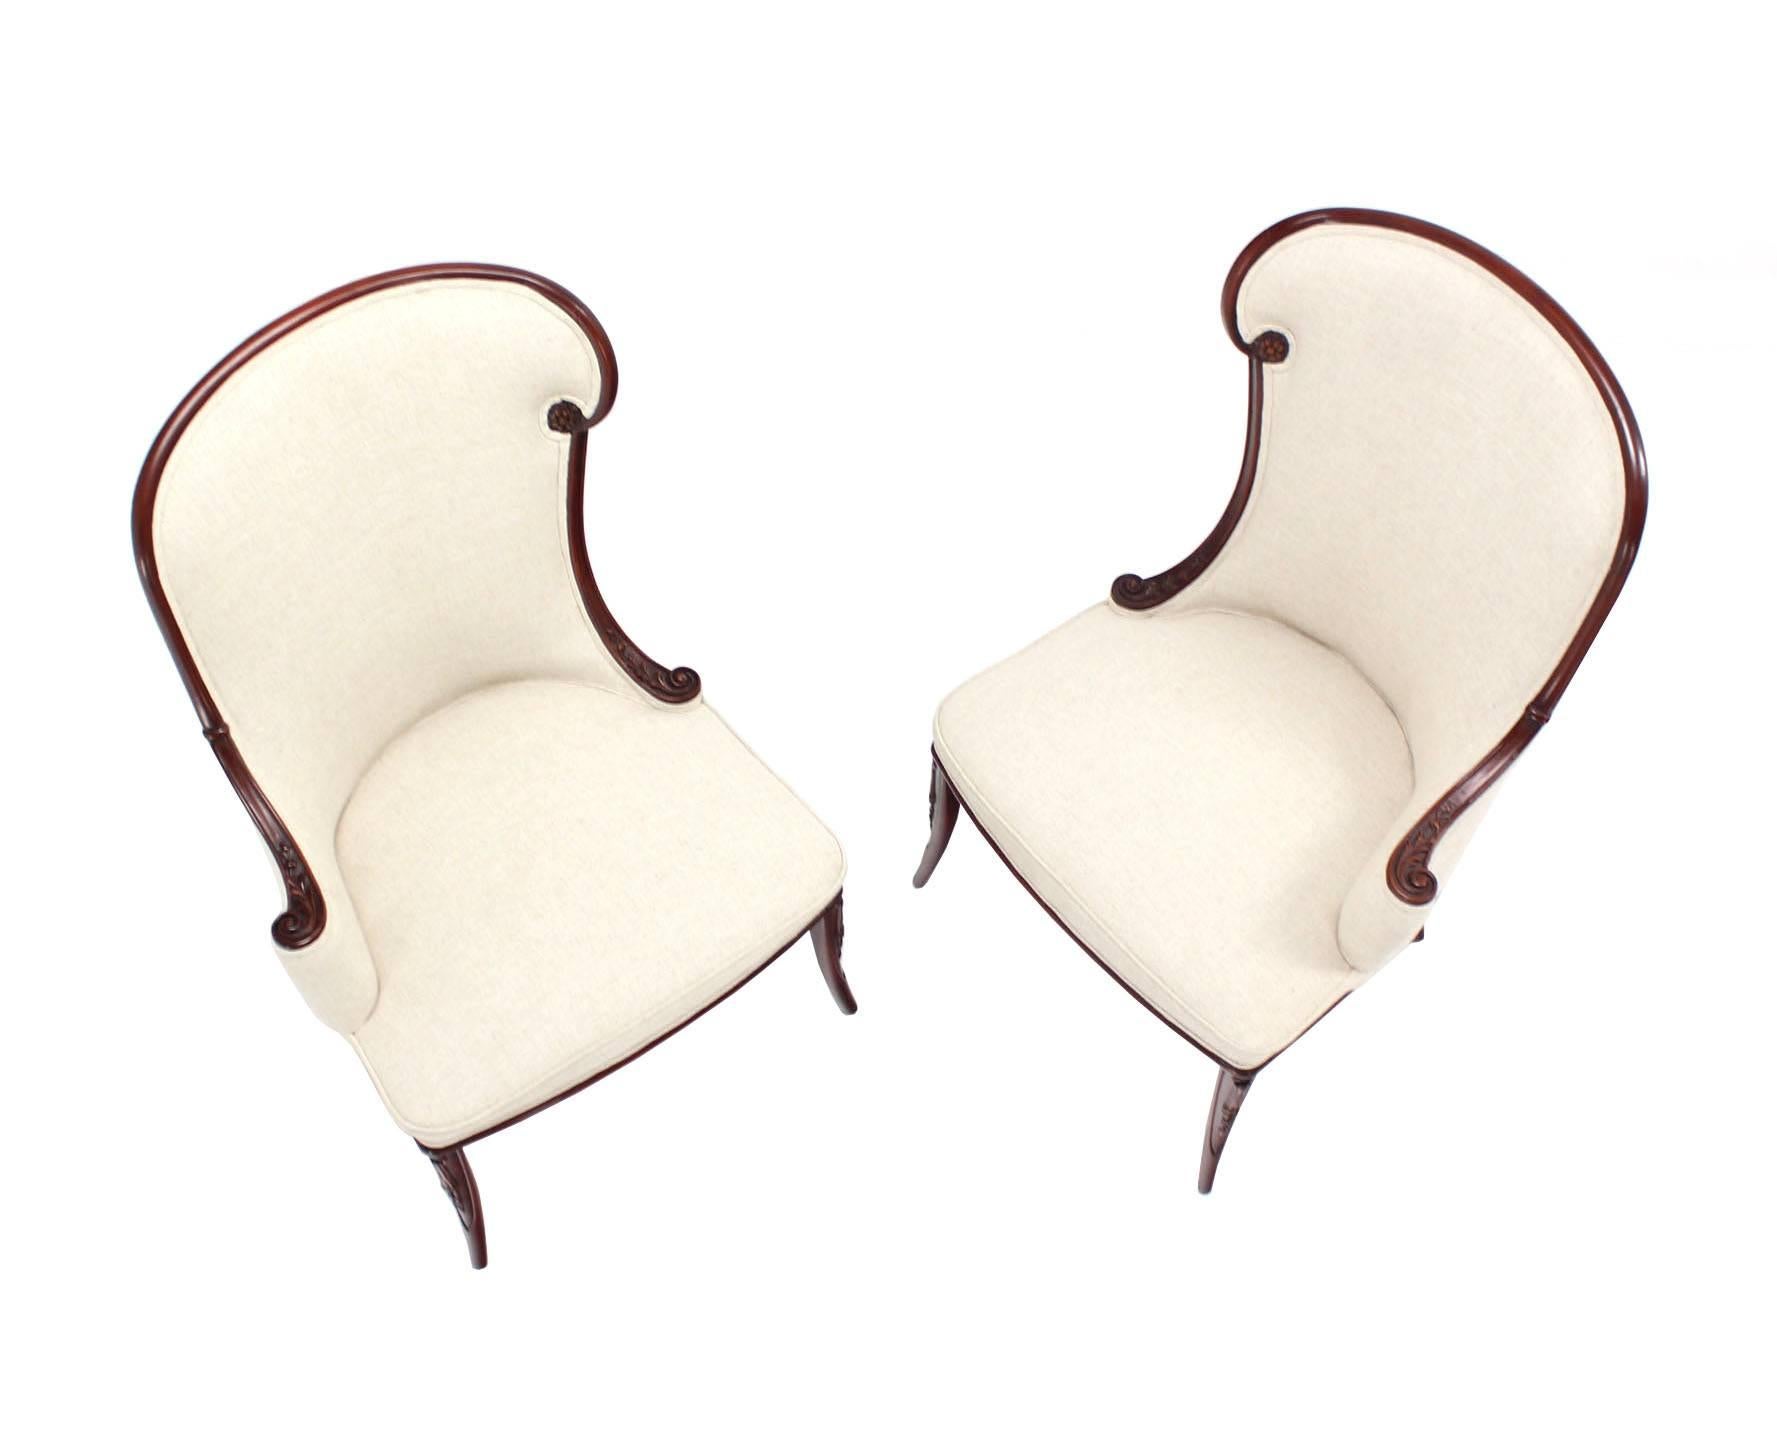 Pair of Antique Carved Mahogany Fireside Chairs with New Upholstery 3